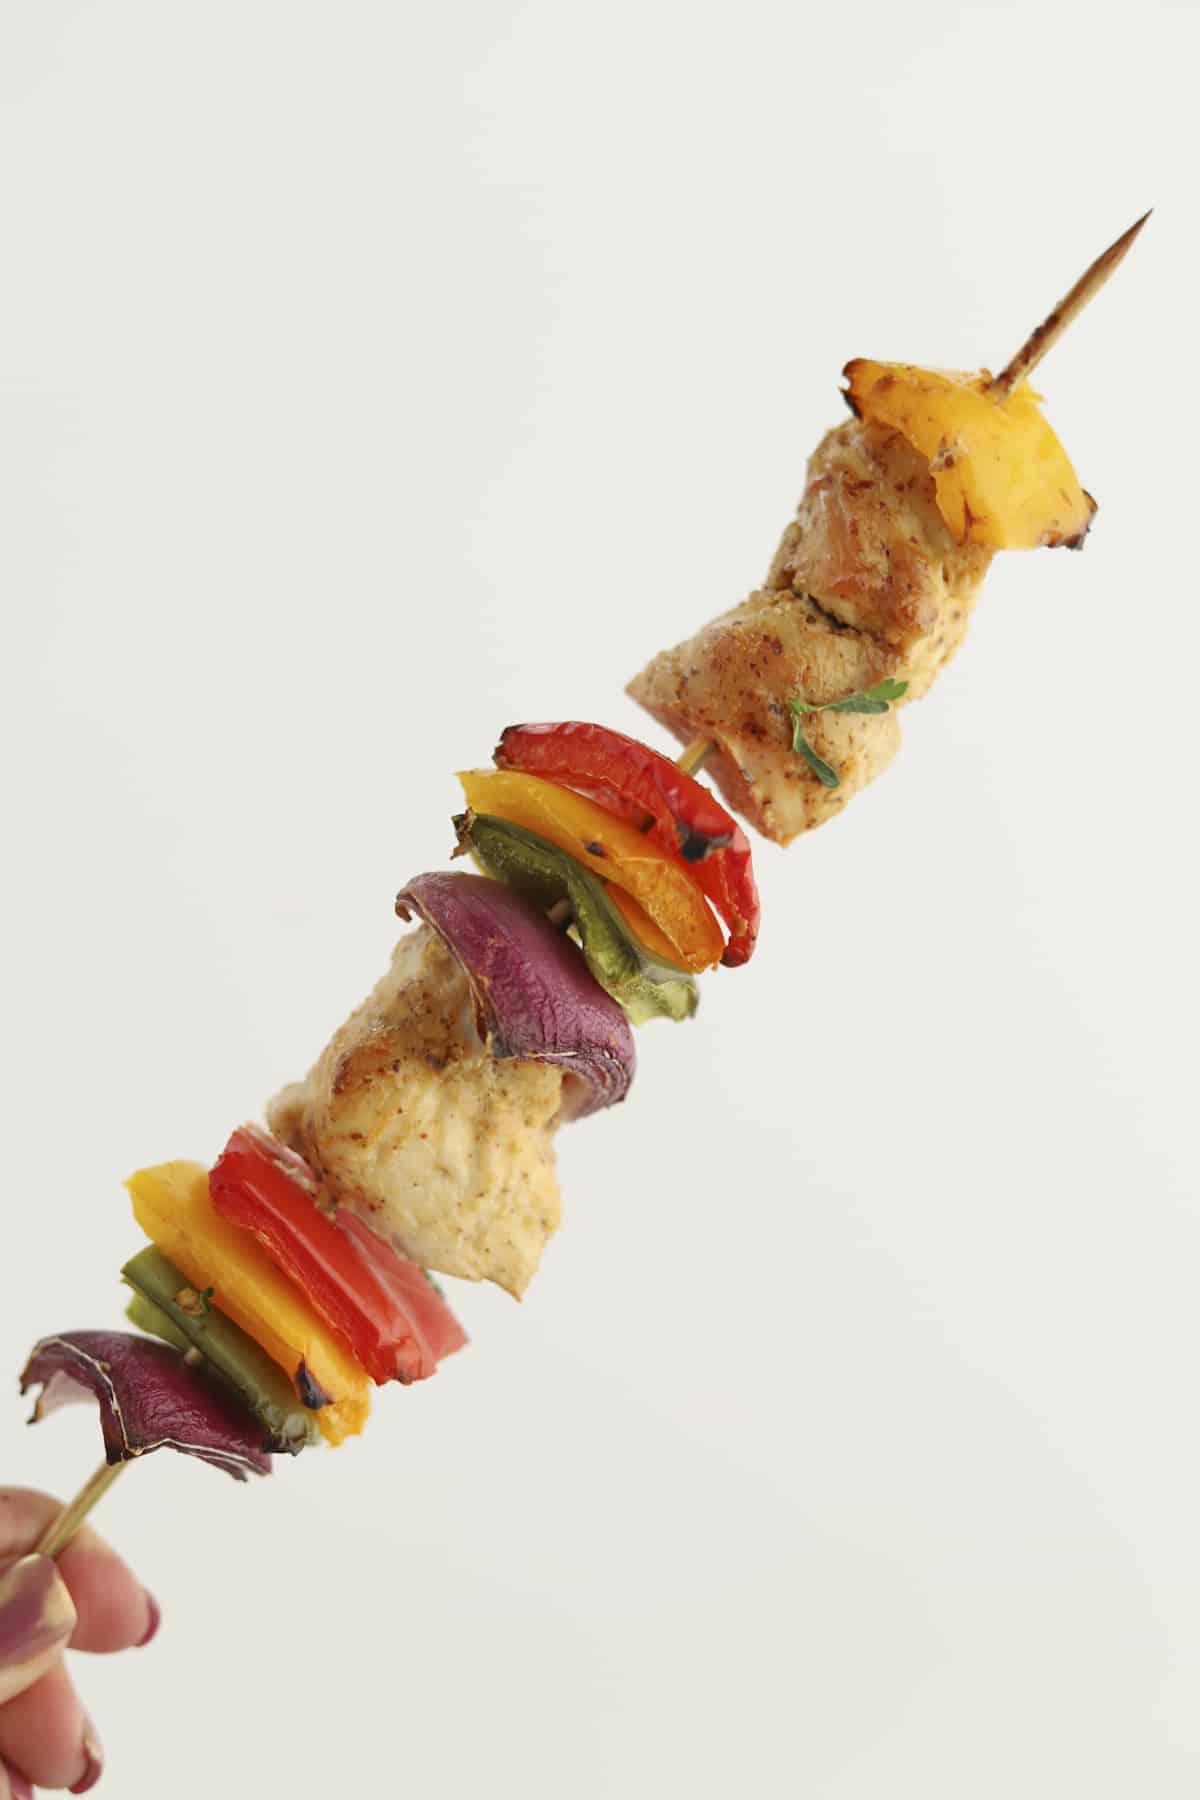 Chicken Skewers in the Oven - The Quick Journey